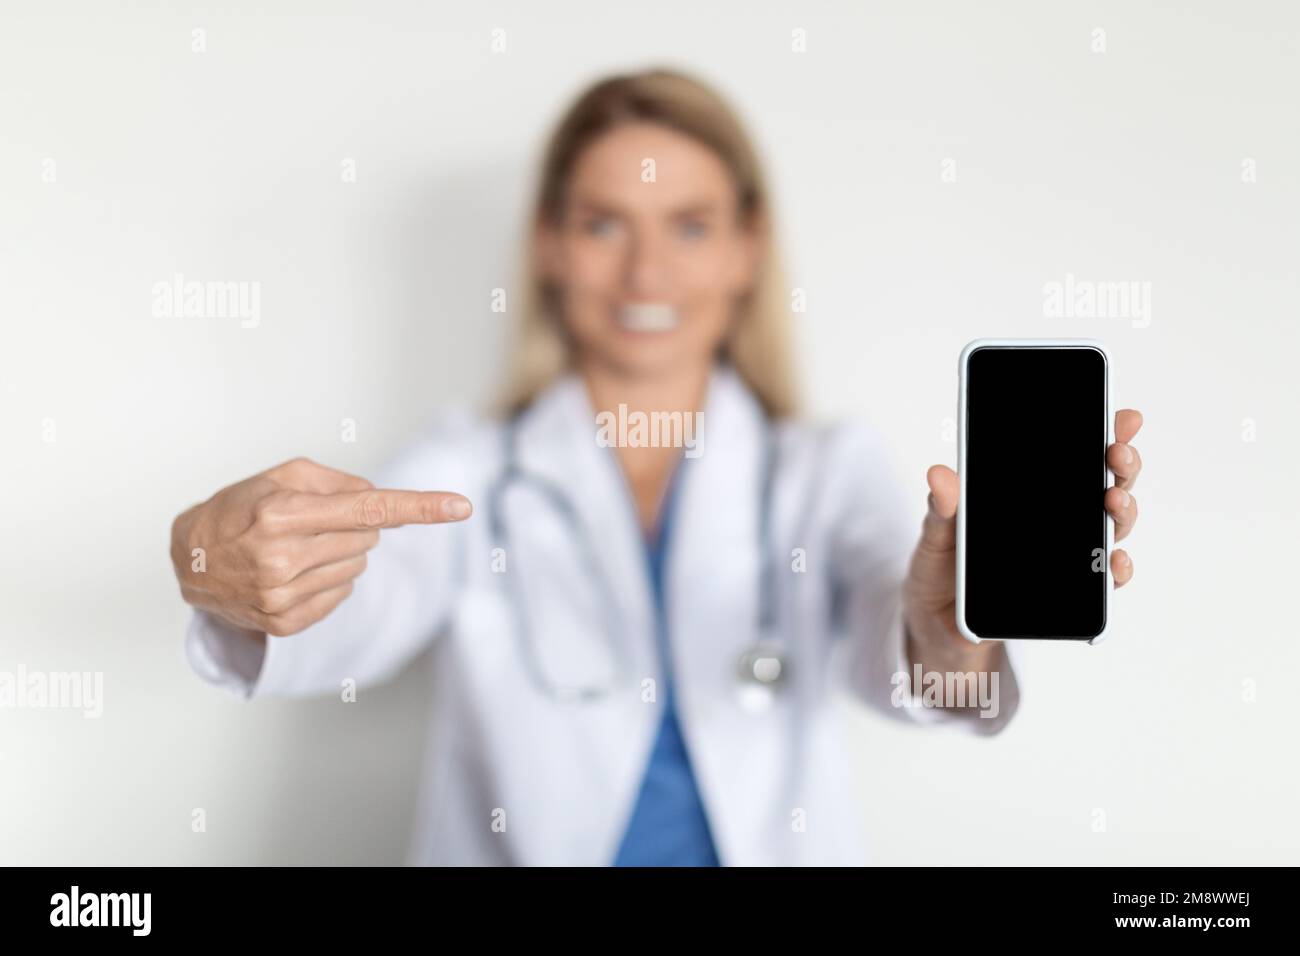 Medical Ad. Smiling Female Doctor Wearing Uniform Pointing At Blank Smartphone Stock Photo